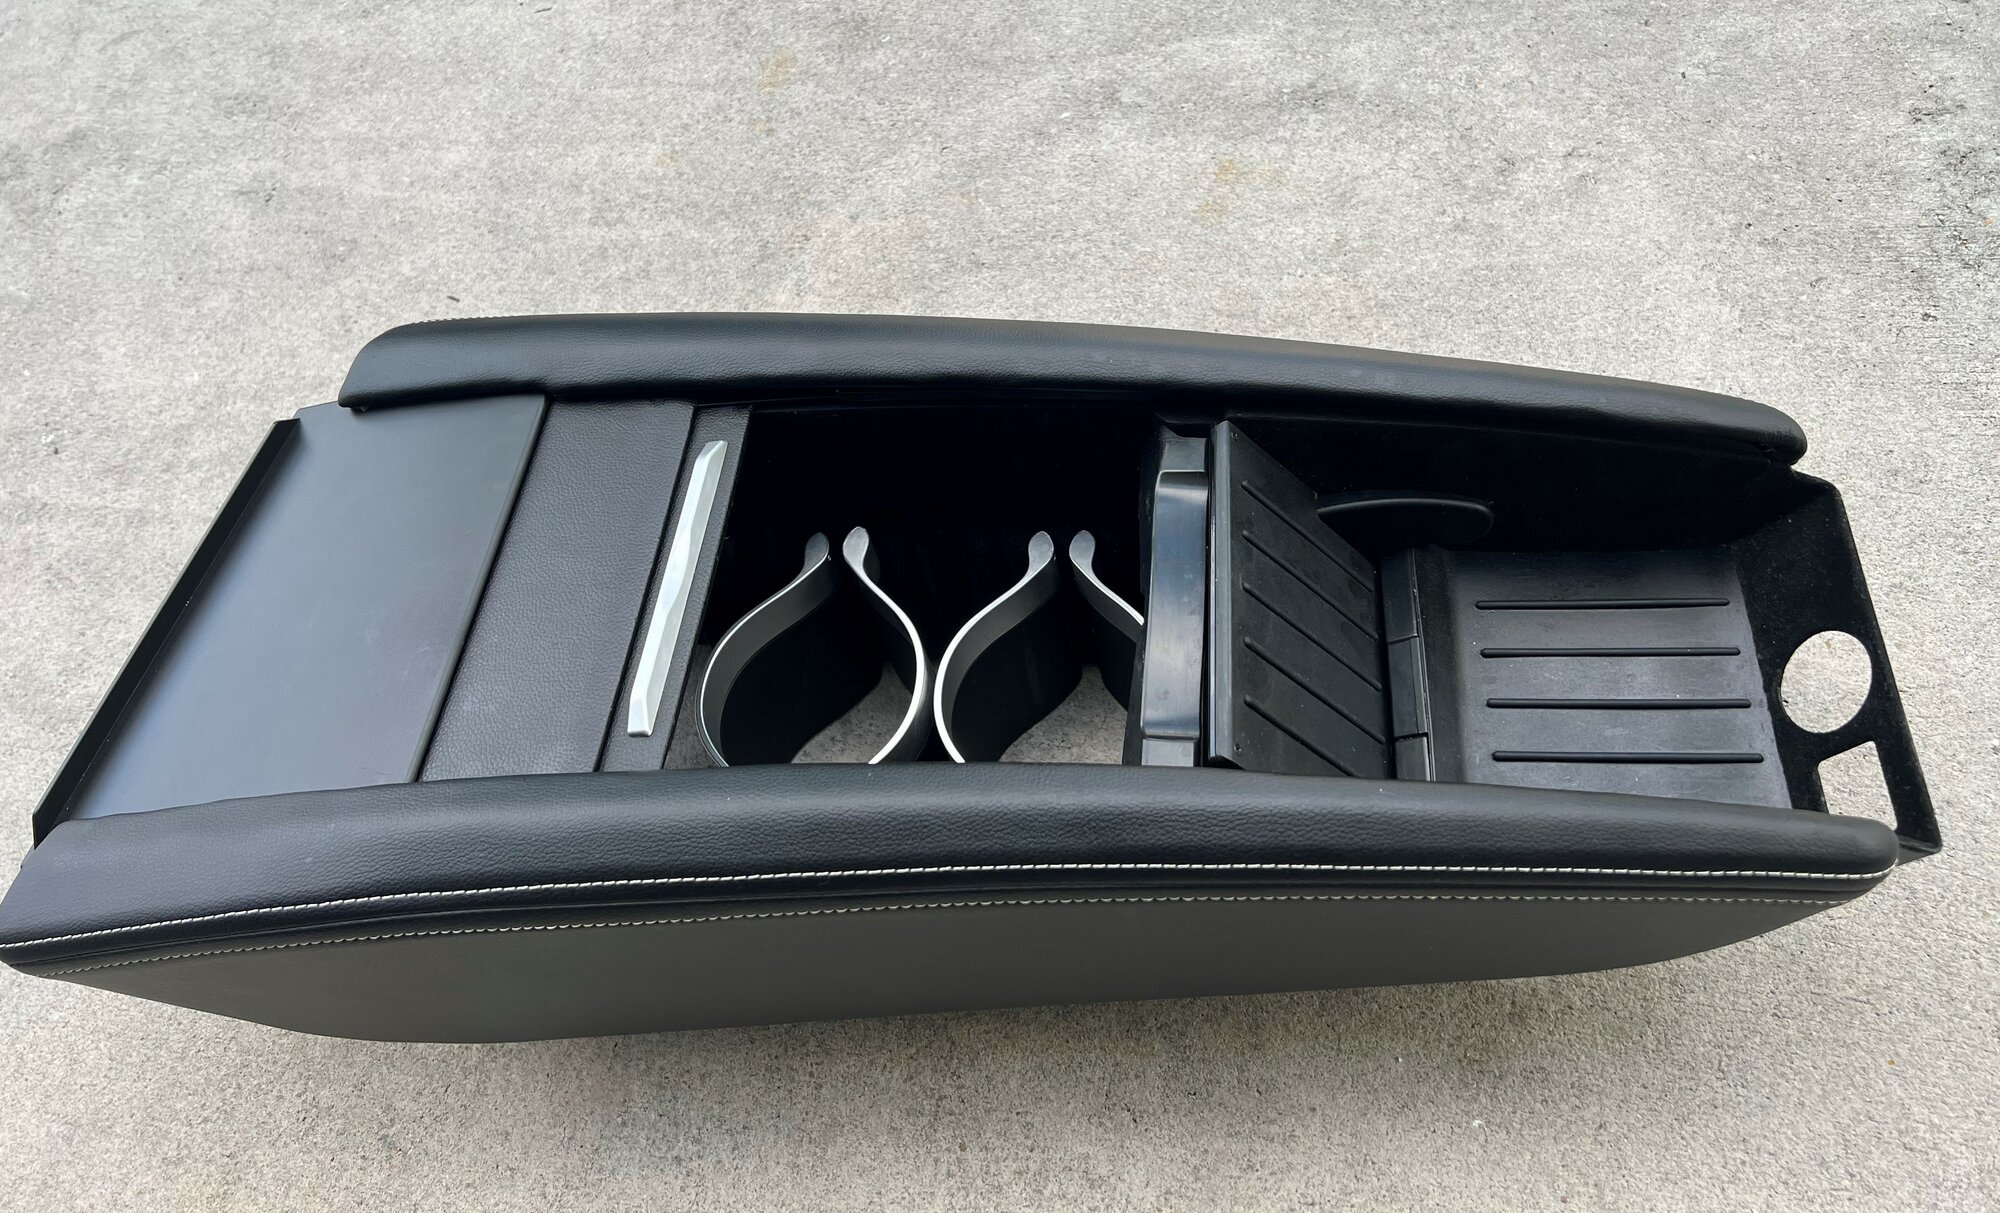 Center Console Insert Model S <May 2016 - Tesland